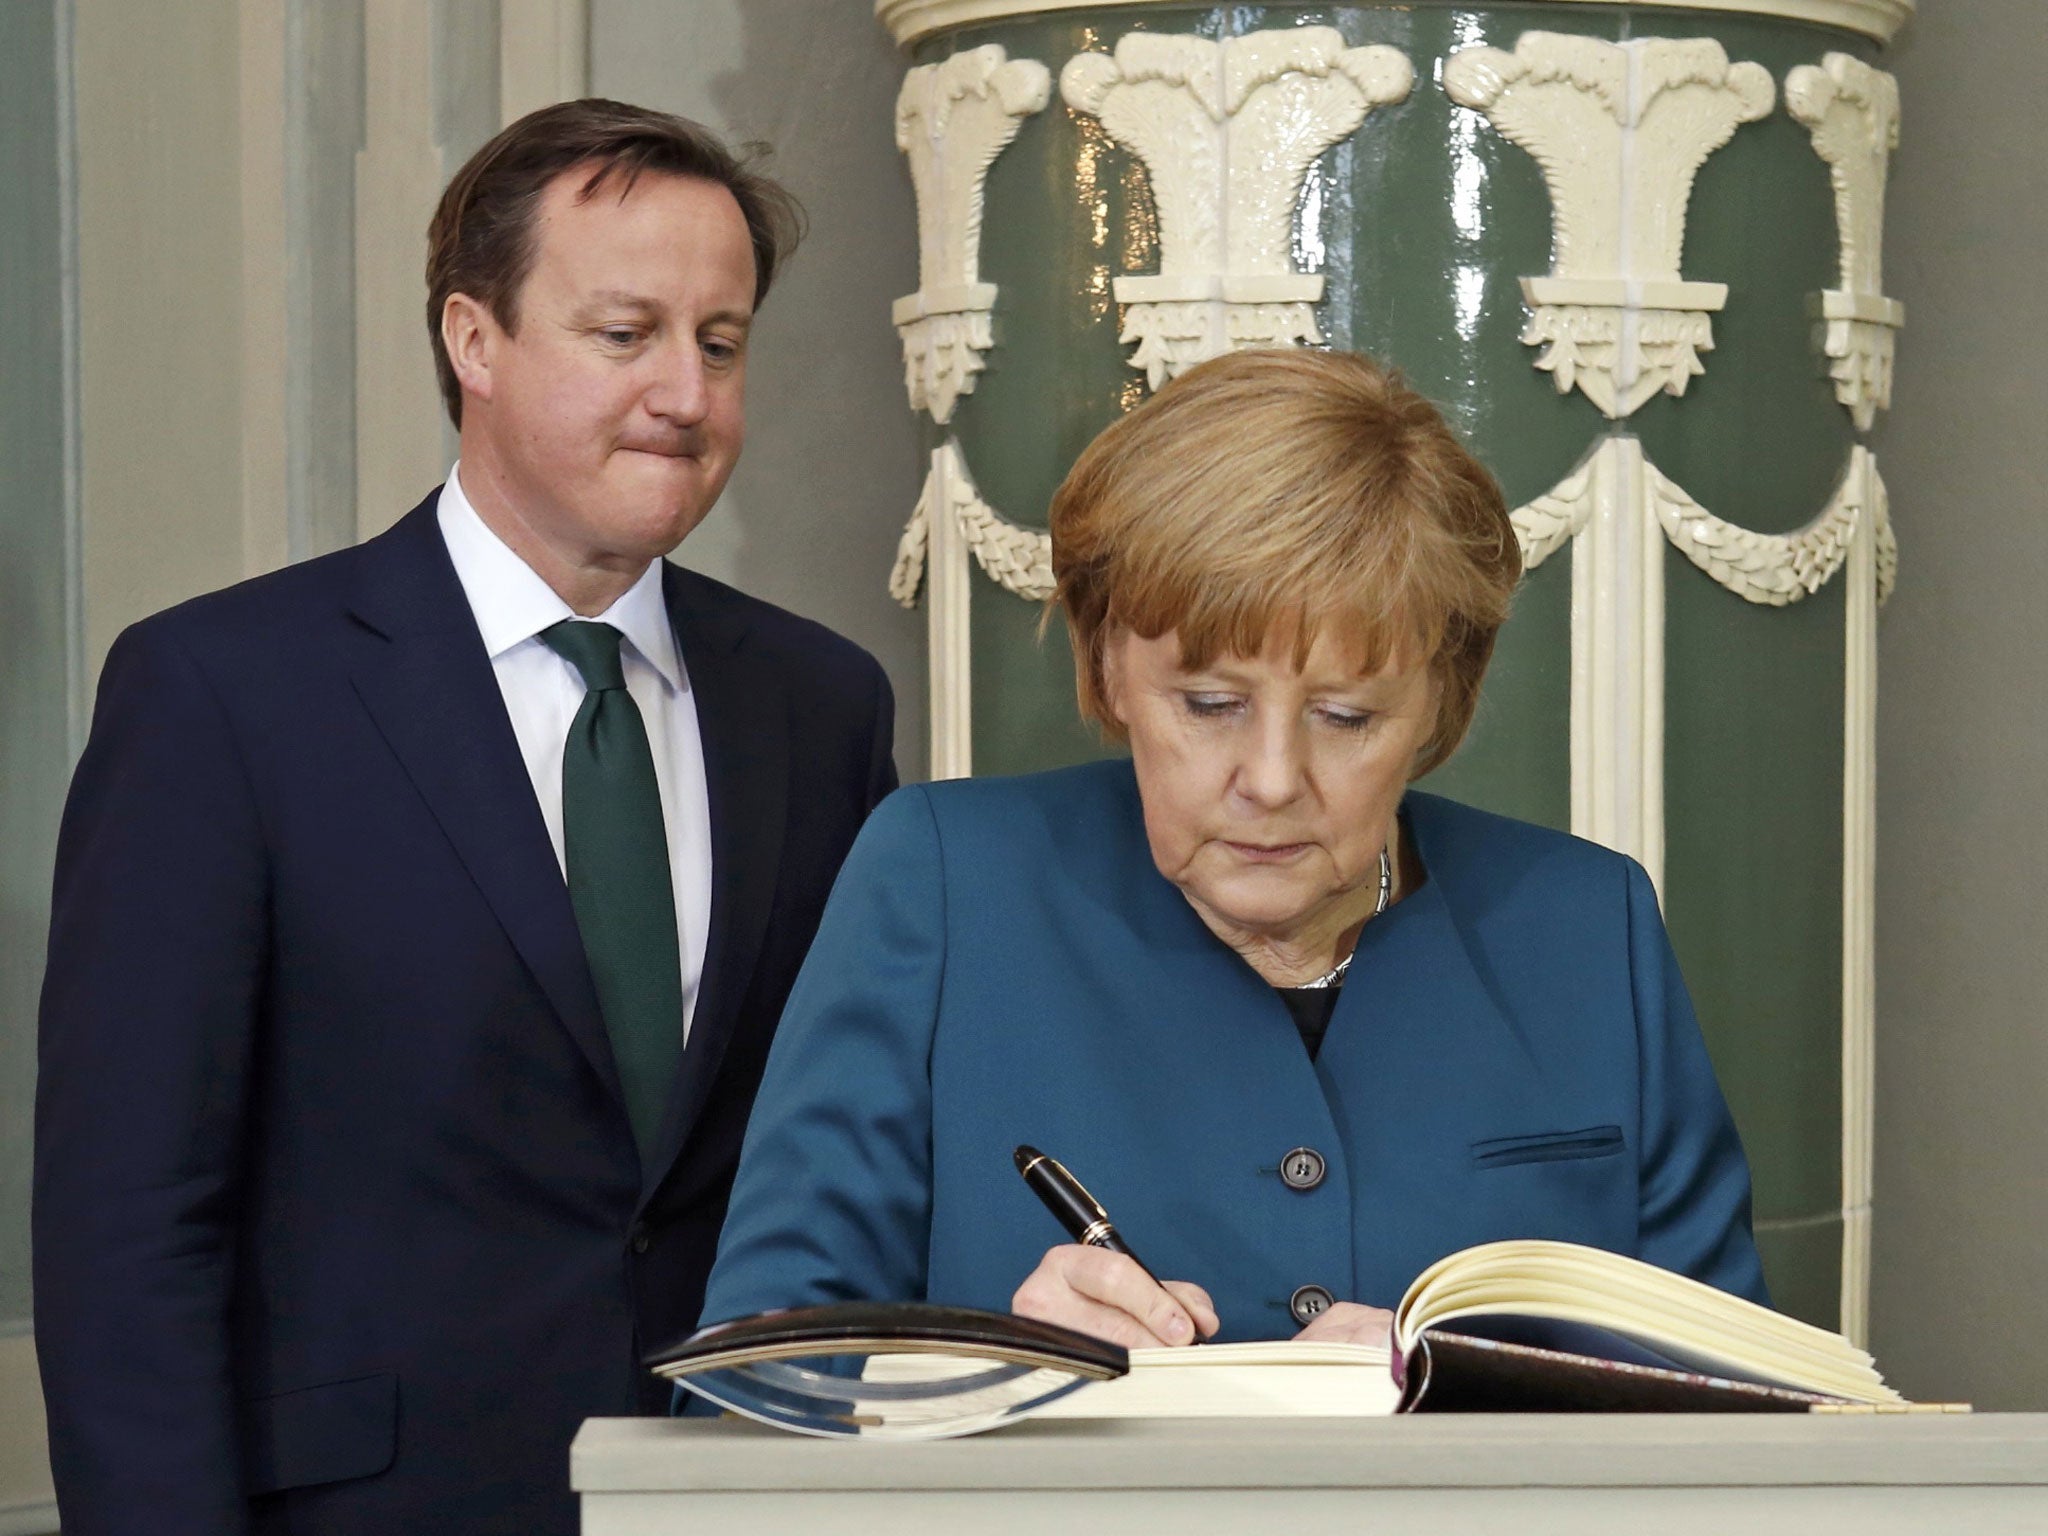 German Chancellor Angela Merkel signs the guestbook as Britain's Prime Minister David Cameron looks on inside the government's guest house Schloss Meseberg, 70 km (44 miles) north of Berlin on April 12, 2013.